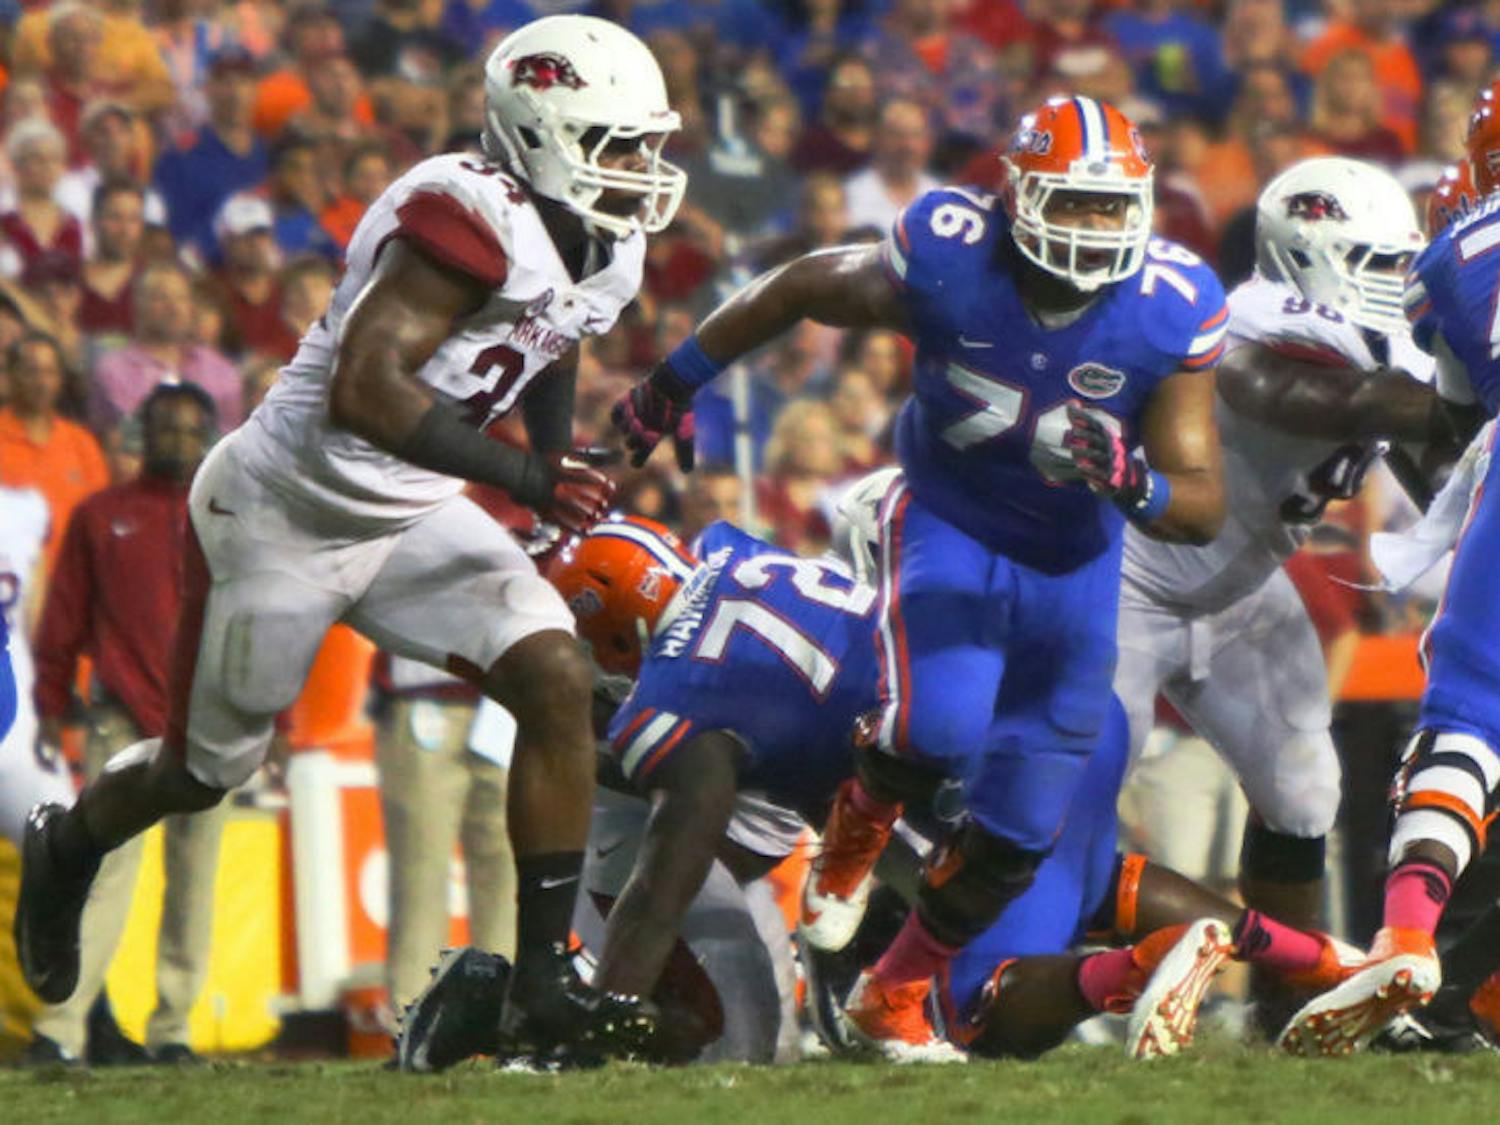 Max Garcia (76) runs at an opposing player during Florida’s 30-10 victory against Arkansas on Oct. 5, 2013, in Ben Hill Griffin Stadium. Garcia moved from guard to center during spring practice.